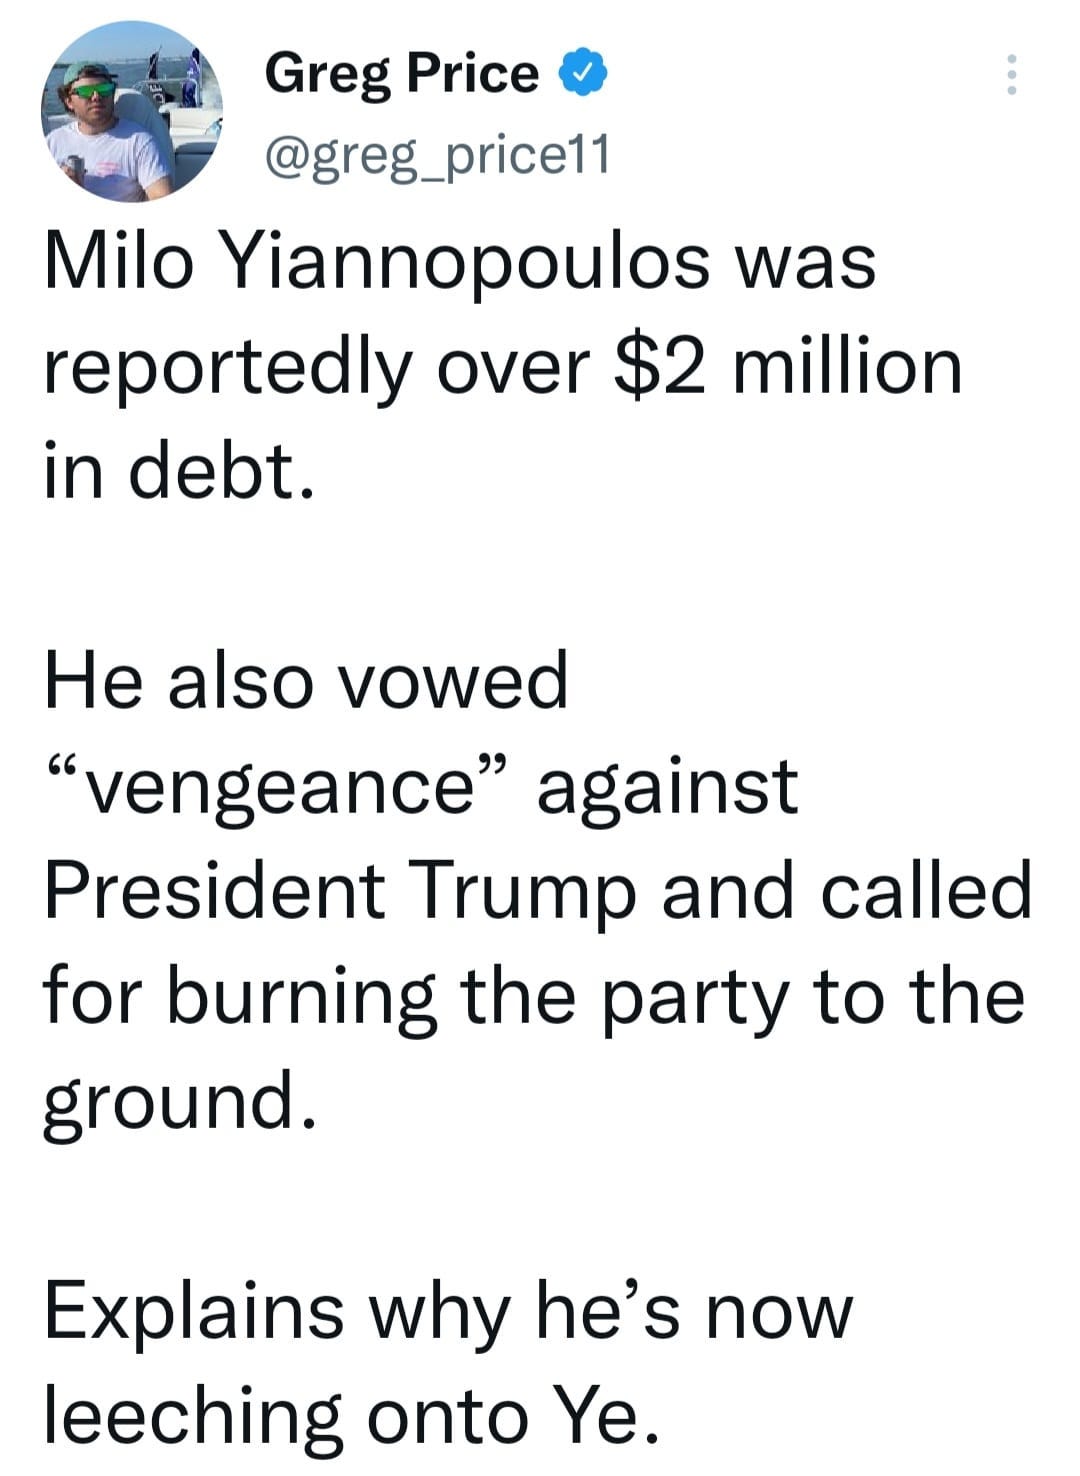 May be an image of 1 person and text that says 'Greg Price @greg_price11 Milo Yiannopoulos was reportedly over $2 million in debt. He also vowed "vengeance" against President Trump and called for burning the party to the ground. Explains why he's now leeching onto Ye.'